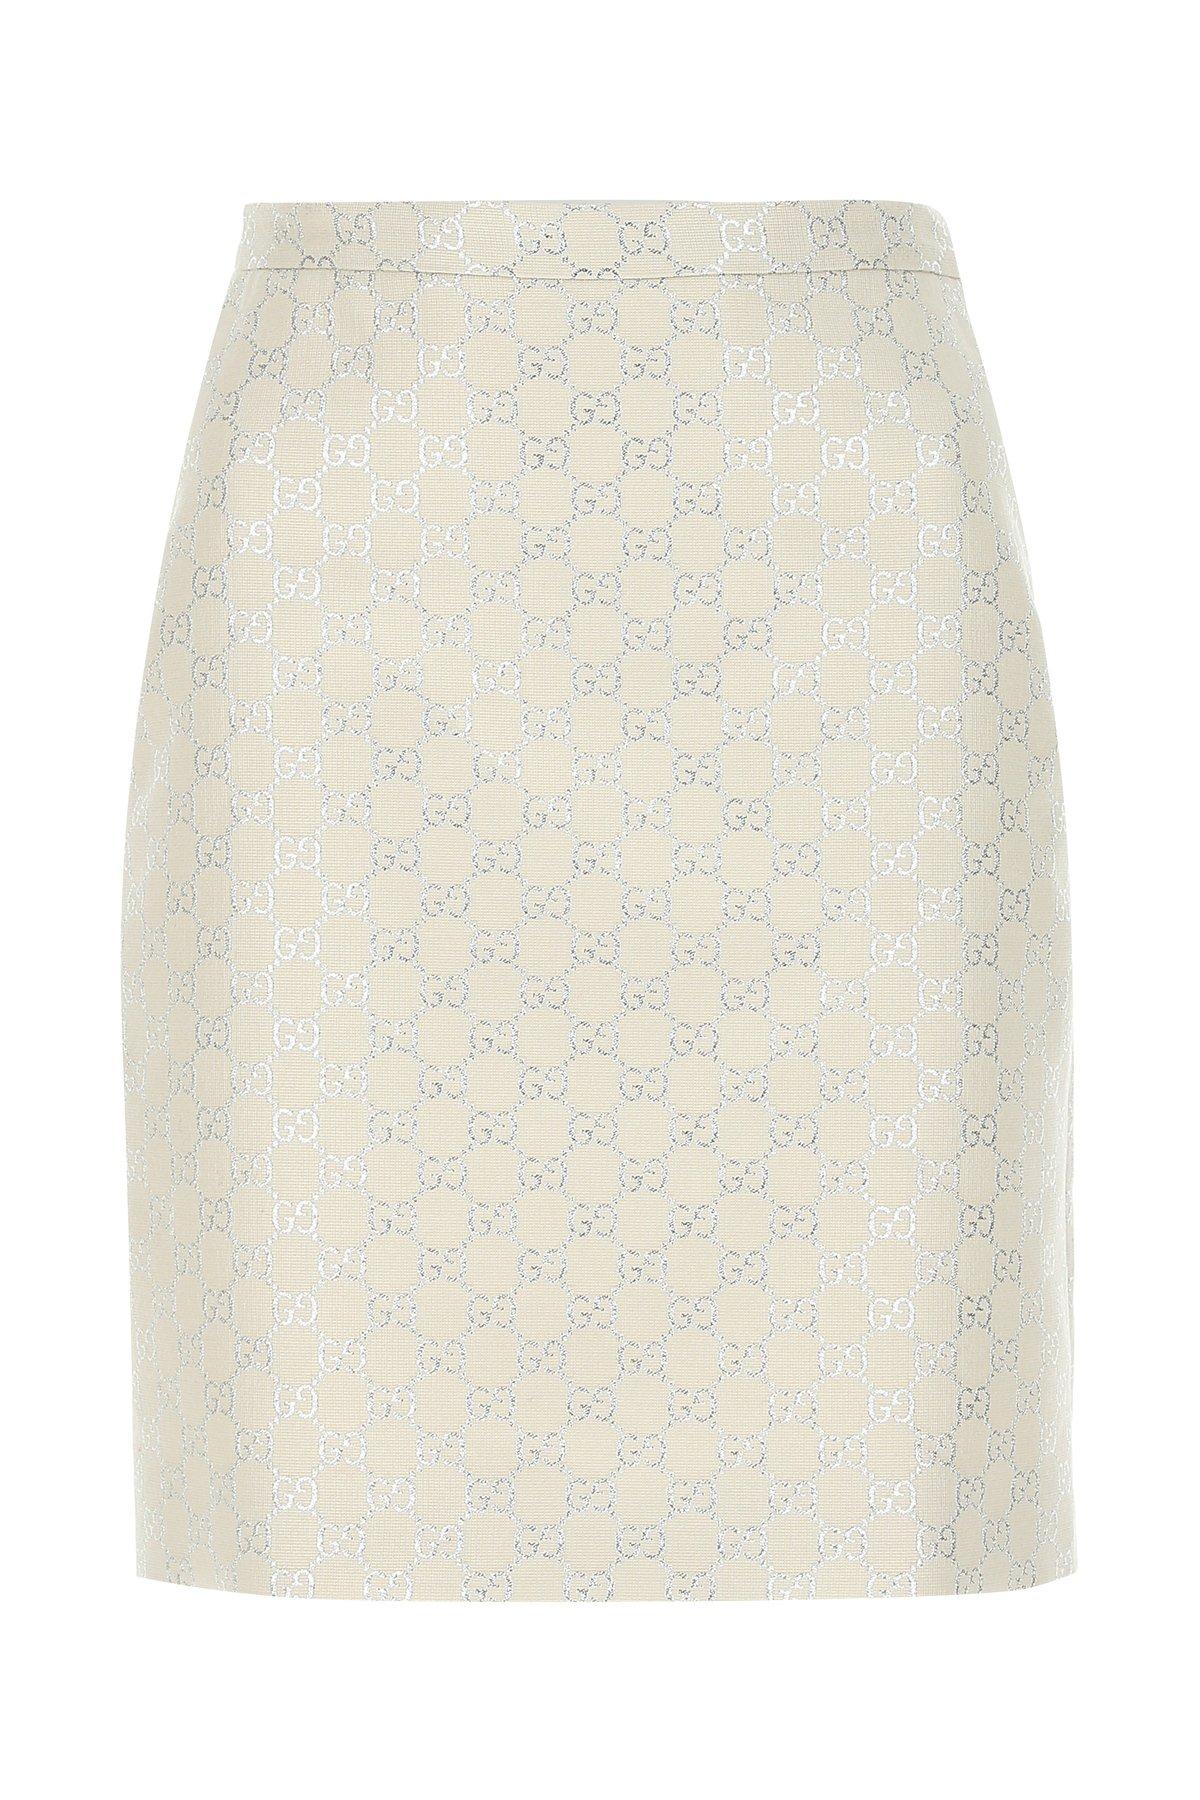 Gucci GG Mini Skirt in Natural | Lyst